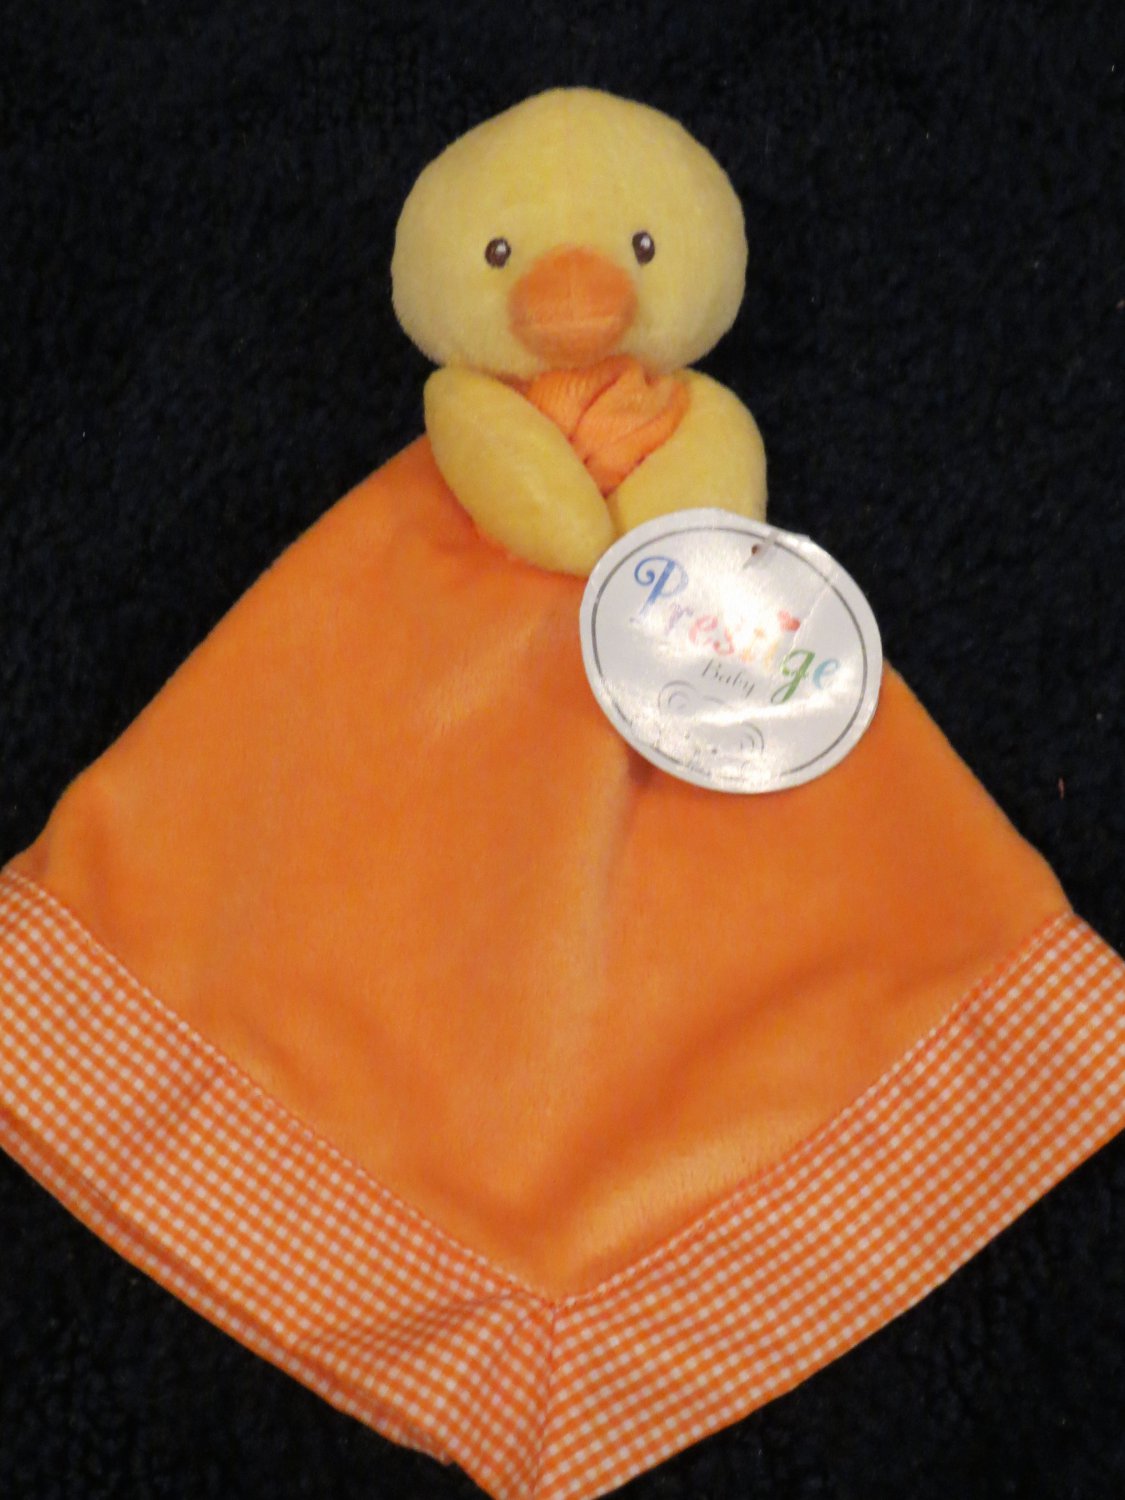 CARTERS PRECIOUS FIRSTS YELLOW DUCK SECURITY BLANKET LOVEY RATTLE CHICK BABY 